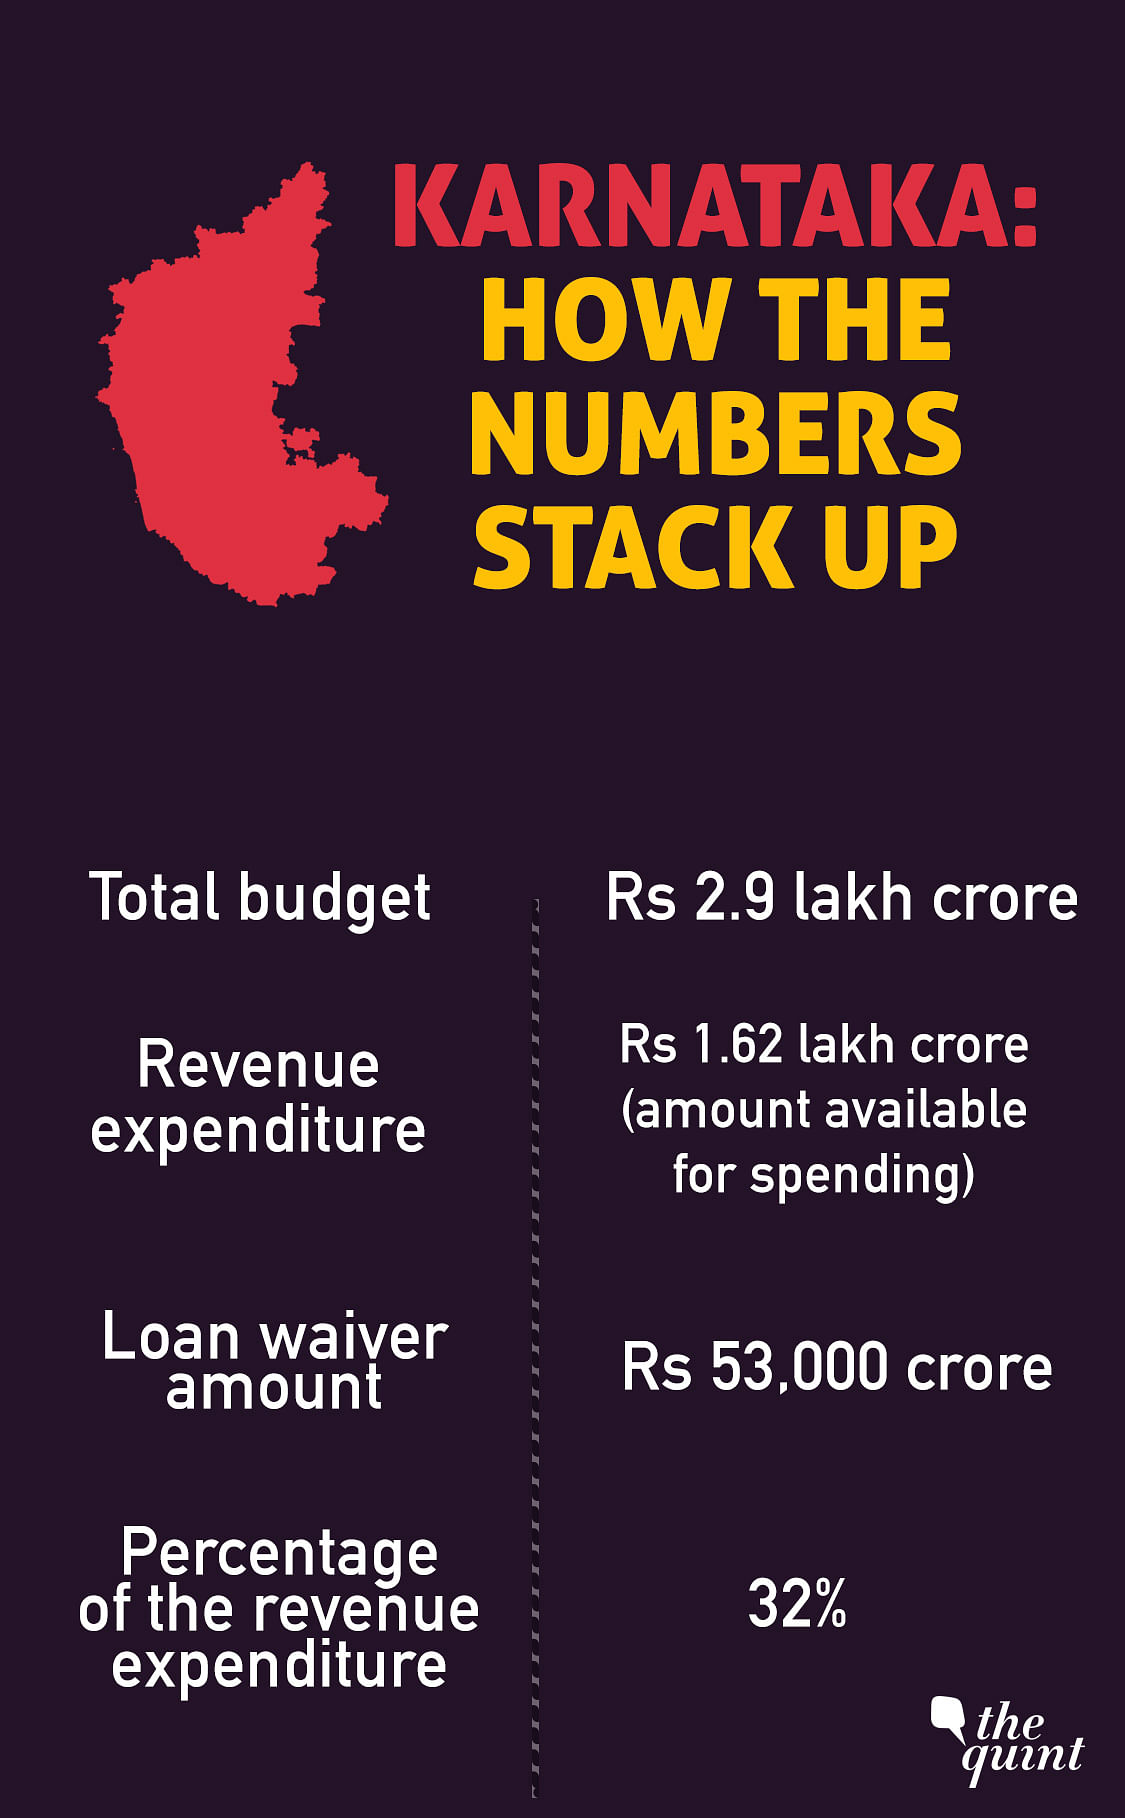 The revenue expenditure of state is around Rs 1.62 lakh crore and the loan waiver would take 32% of this amount. 